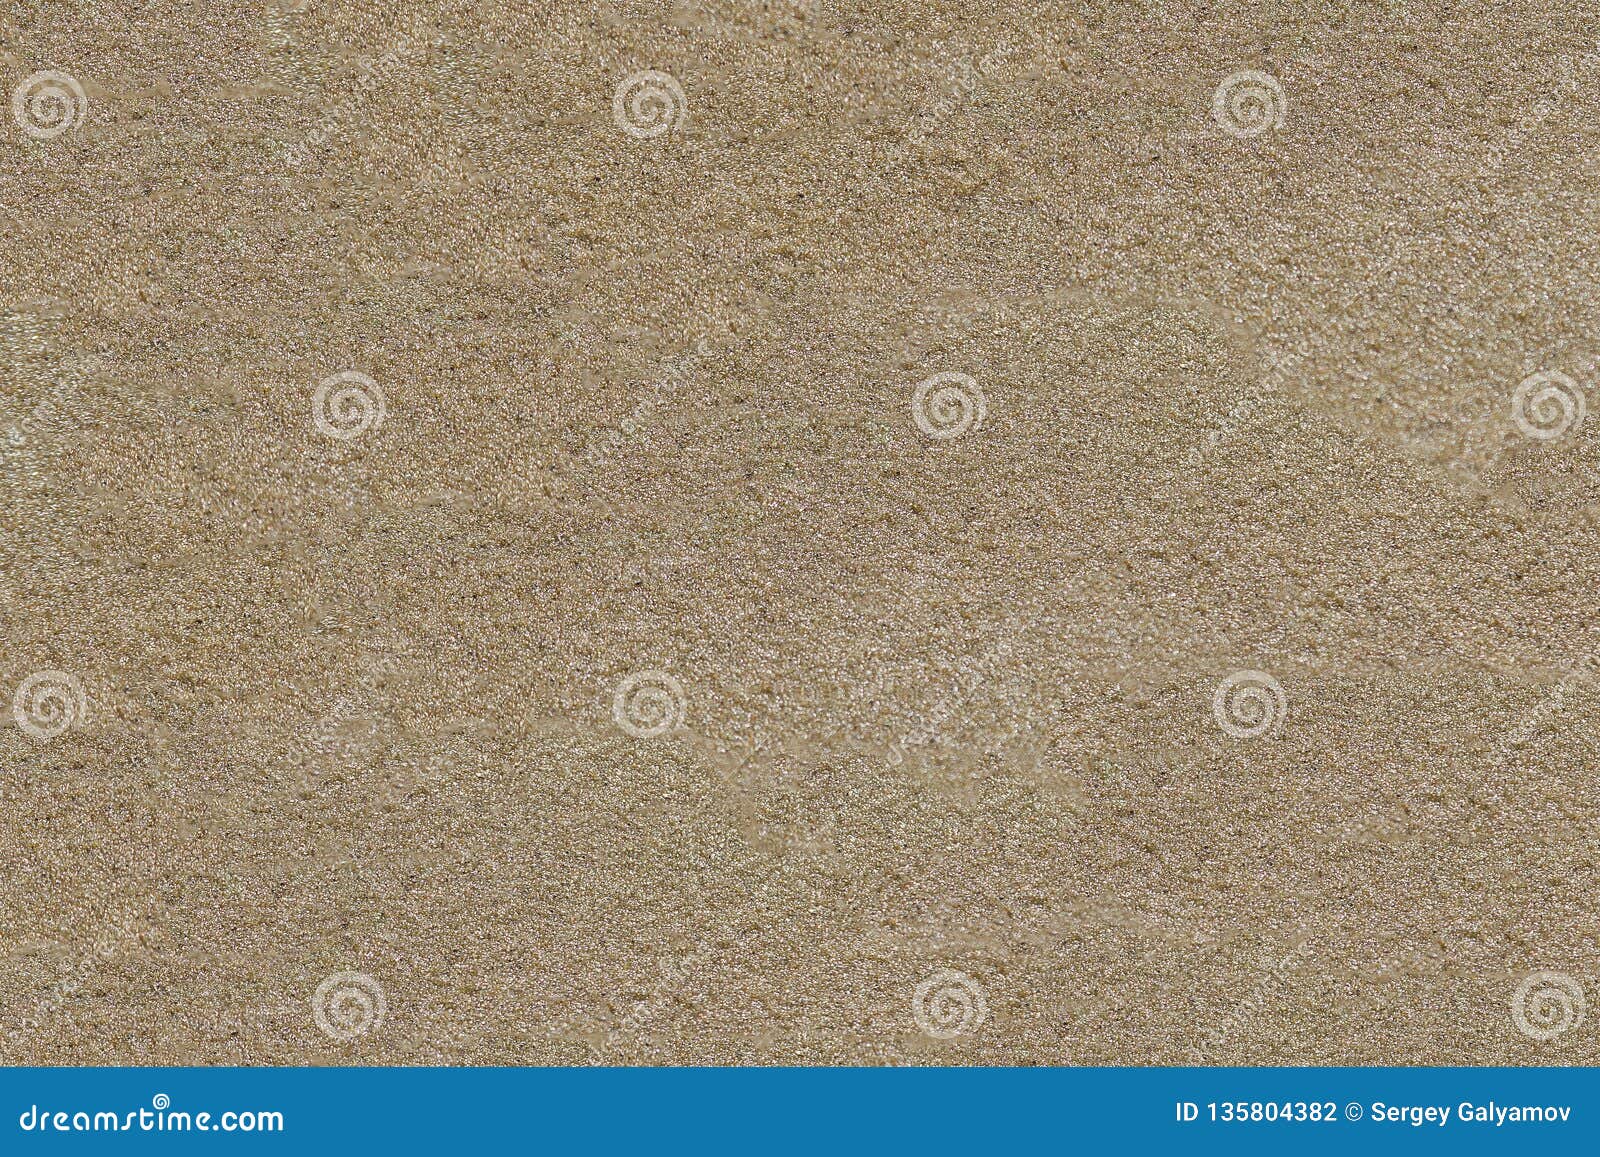 The Surface of the Sandy Beach. Grainy Texture Stock Photo - Image of ...